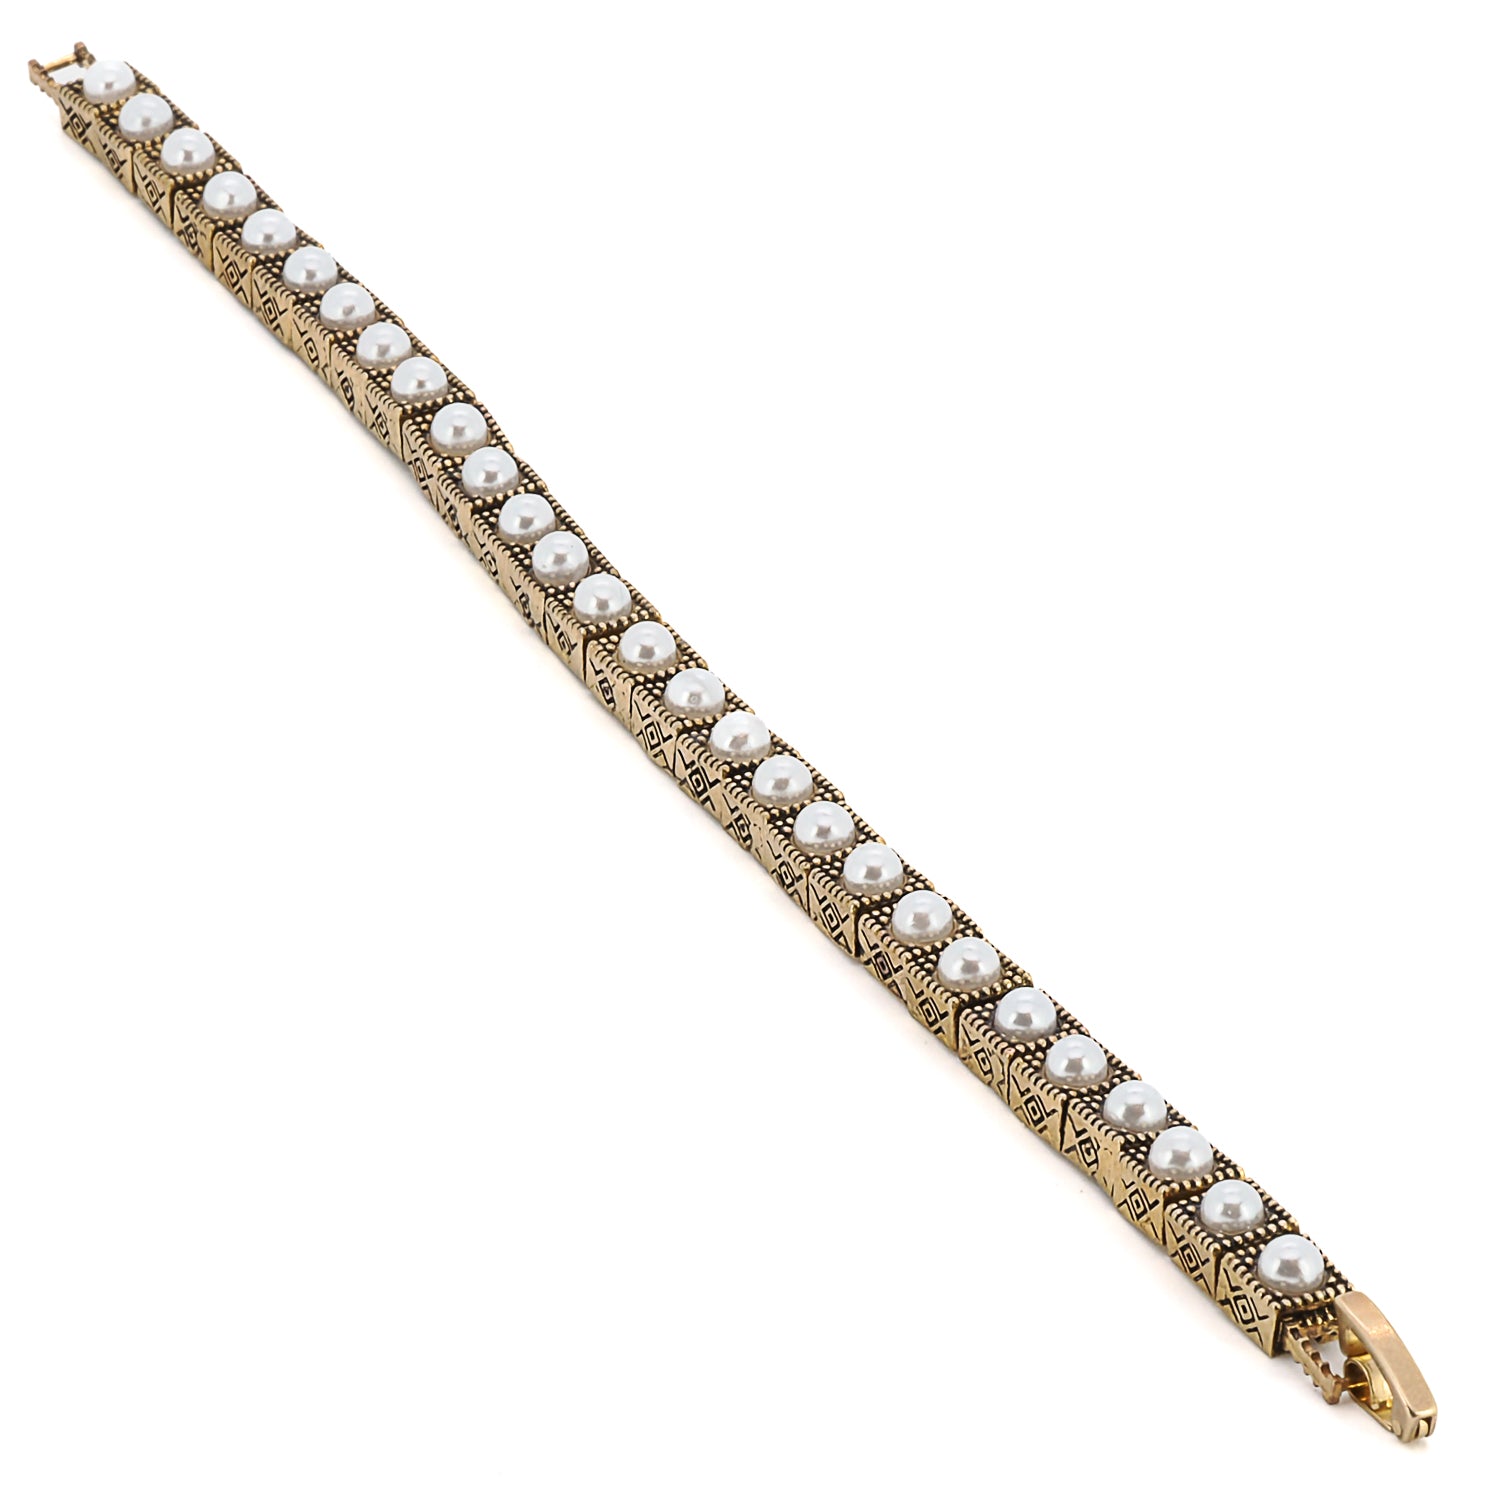 The handmade Pearl Tennis Bracelet, a symbol of elegance and refinement.